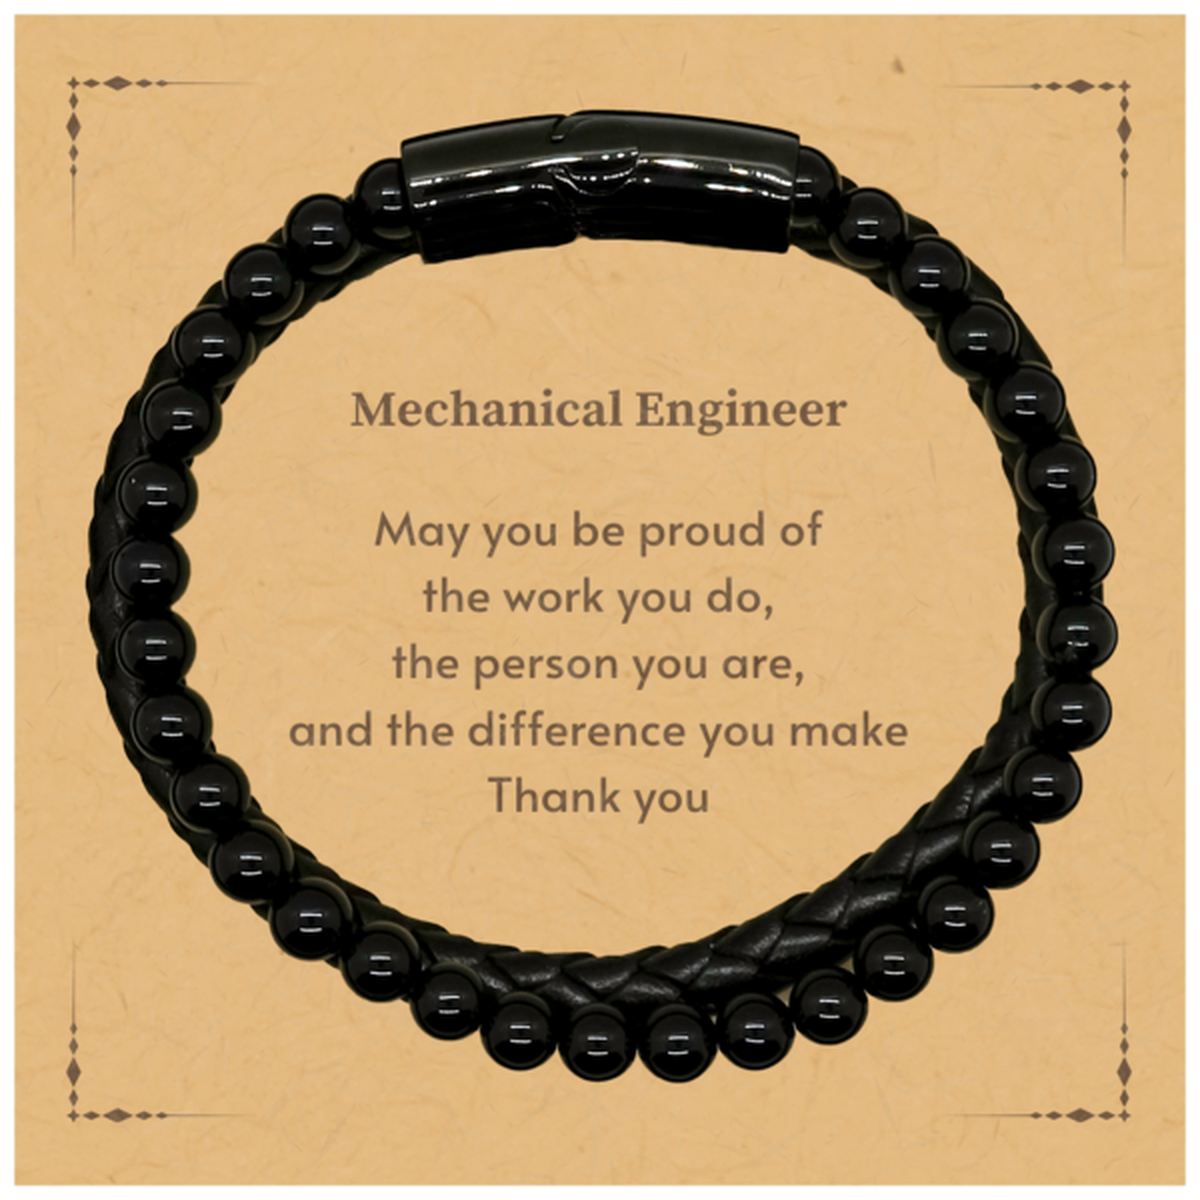 Heartwarming Stone Leather Bracelets Retirement Coworkers Gifts for Mechanical Engineer, Mechanical Engineer May You be proud of the work you do, the person you are Gifts for Boss Men Women Friends